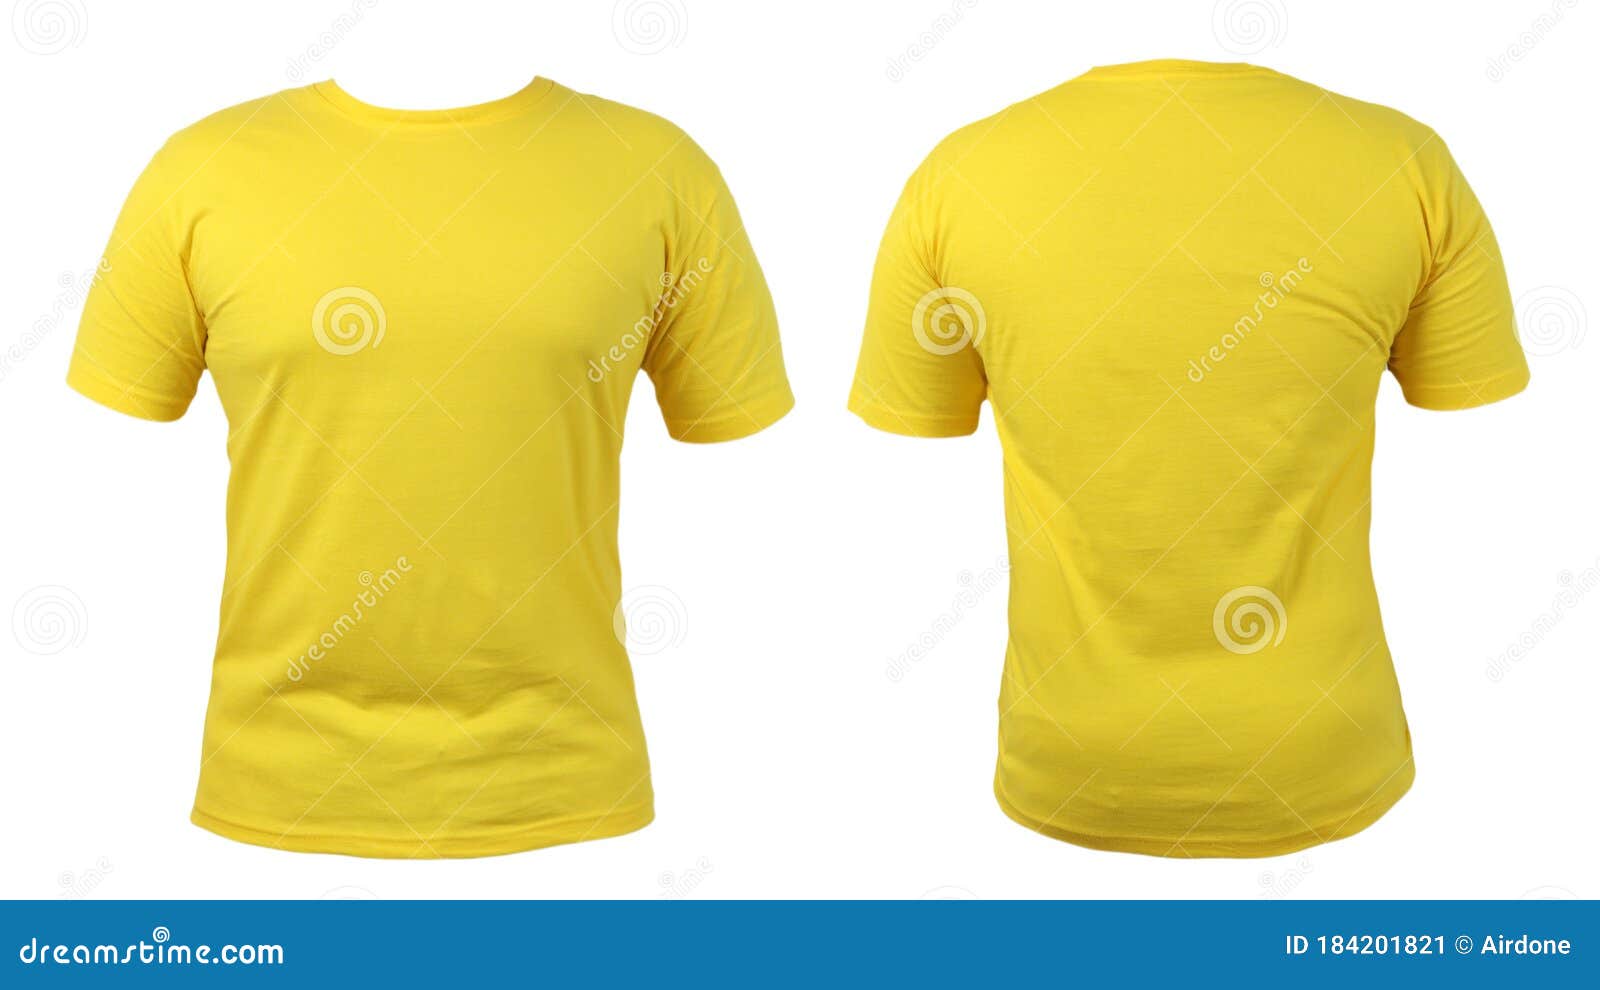 Yellow Tshirts Front And Back Used As Design Template Stock Photo